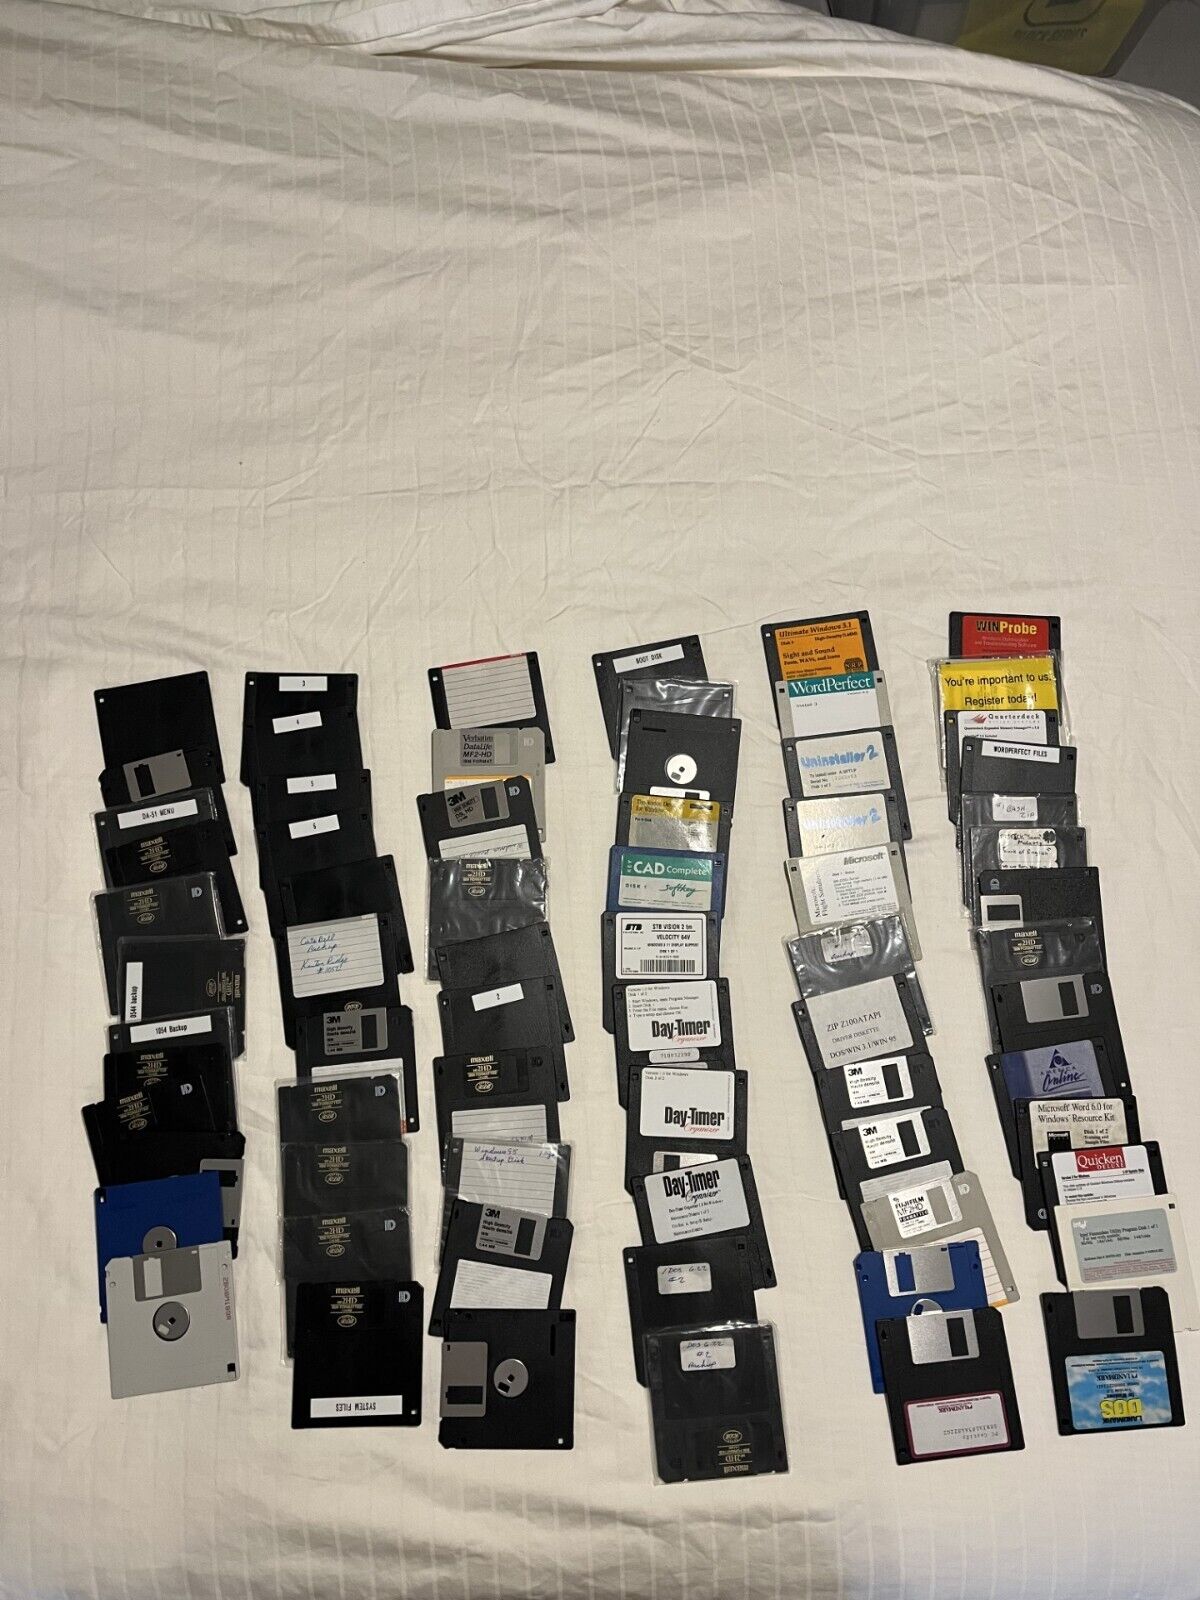 over 70 Vintage Lot Of Floppy Discs, as is.